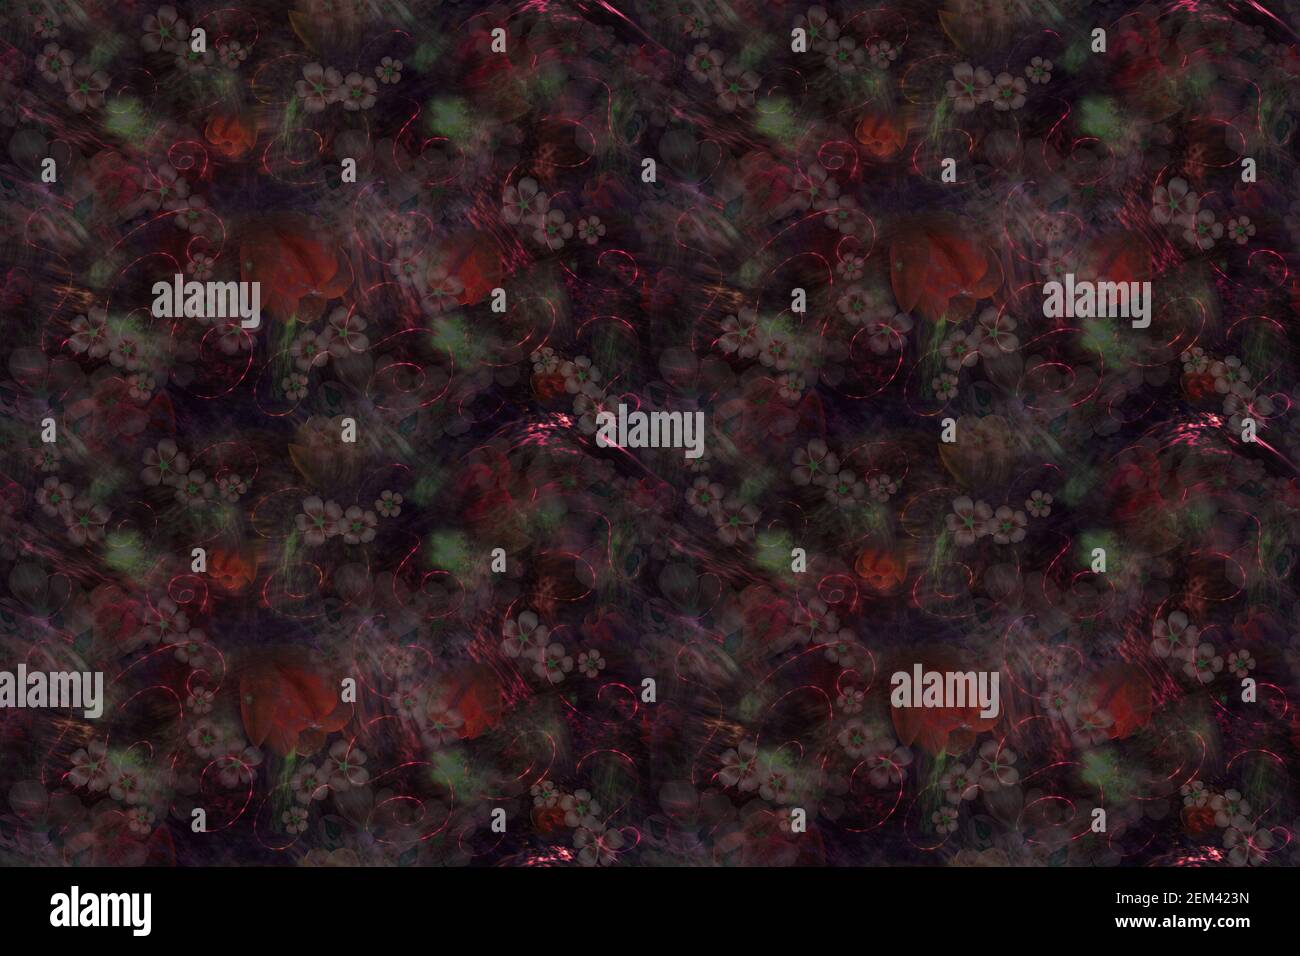 Dark seamless pattern with tulips and small flowers. Dark background. Stock Photo